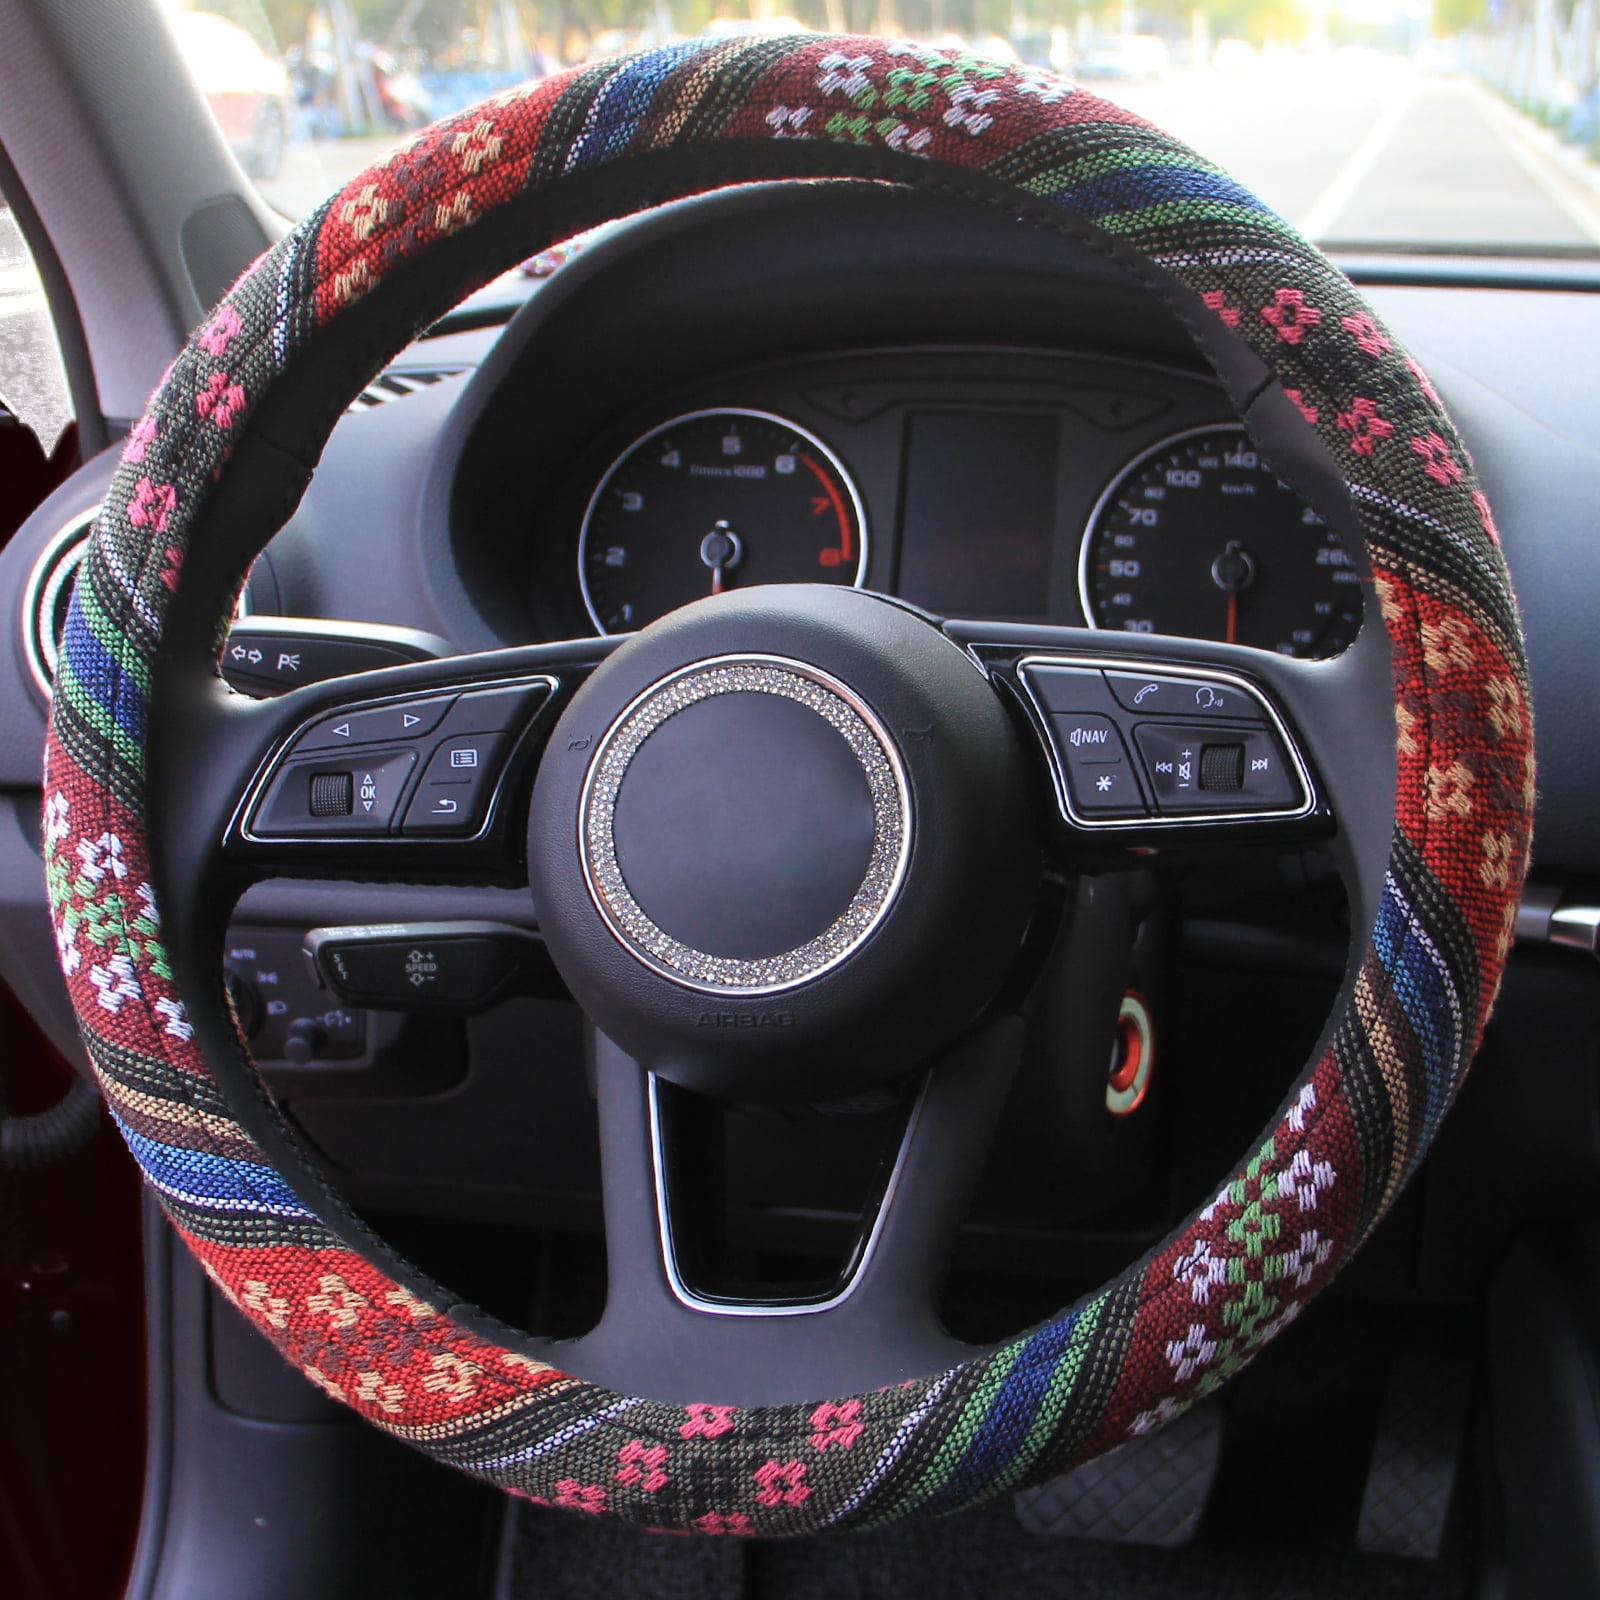 Copap Car Steering Wheel Cover 15 inch Yellow Baja Blanket Woven Cloth Fit Most Auto Cars Coarse Flax Cloth 